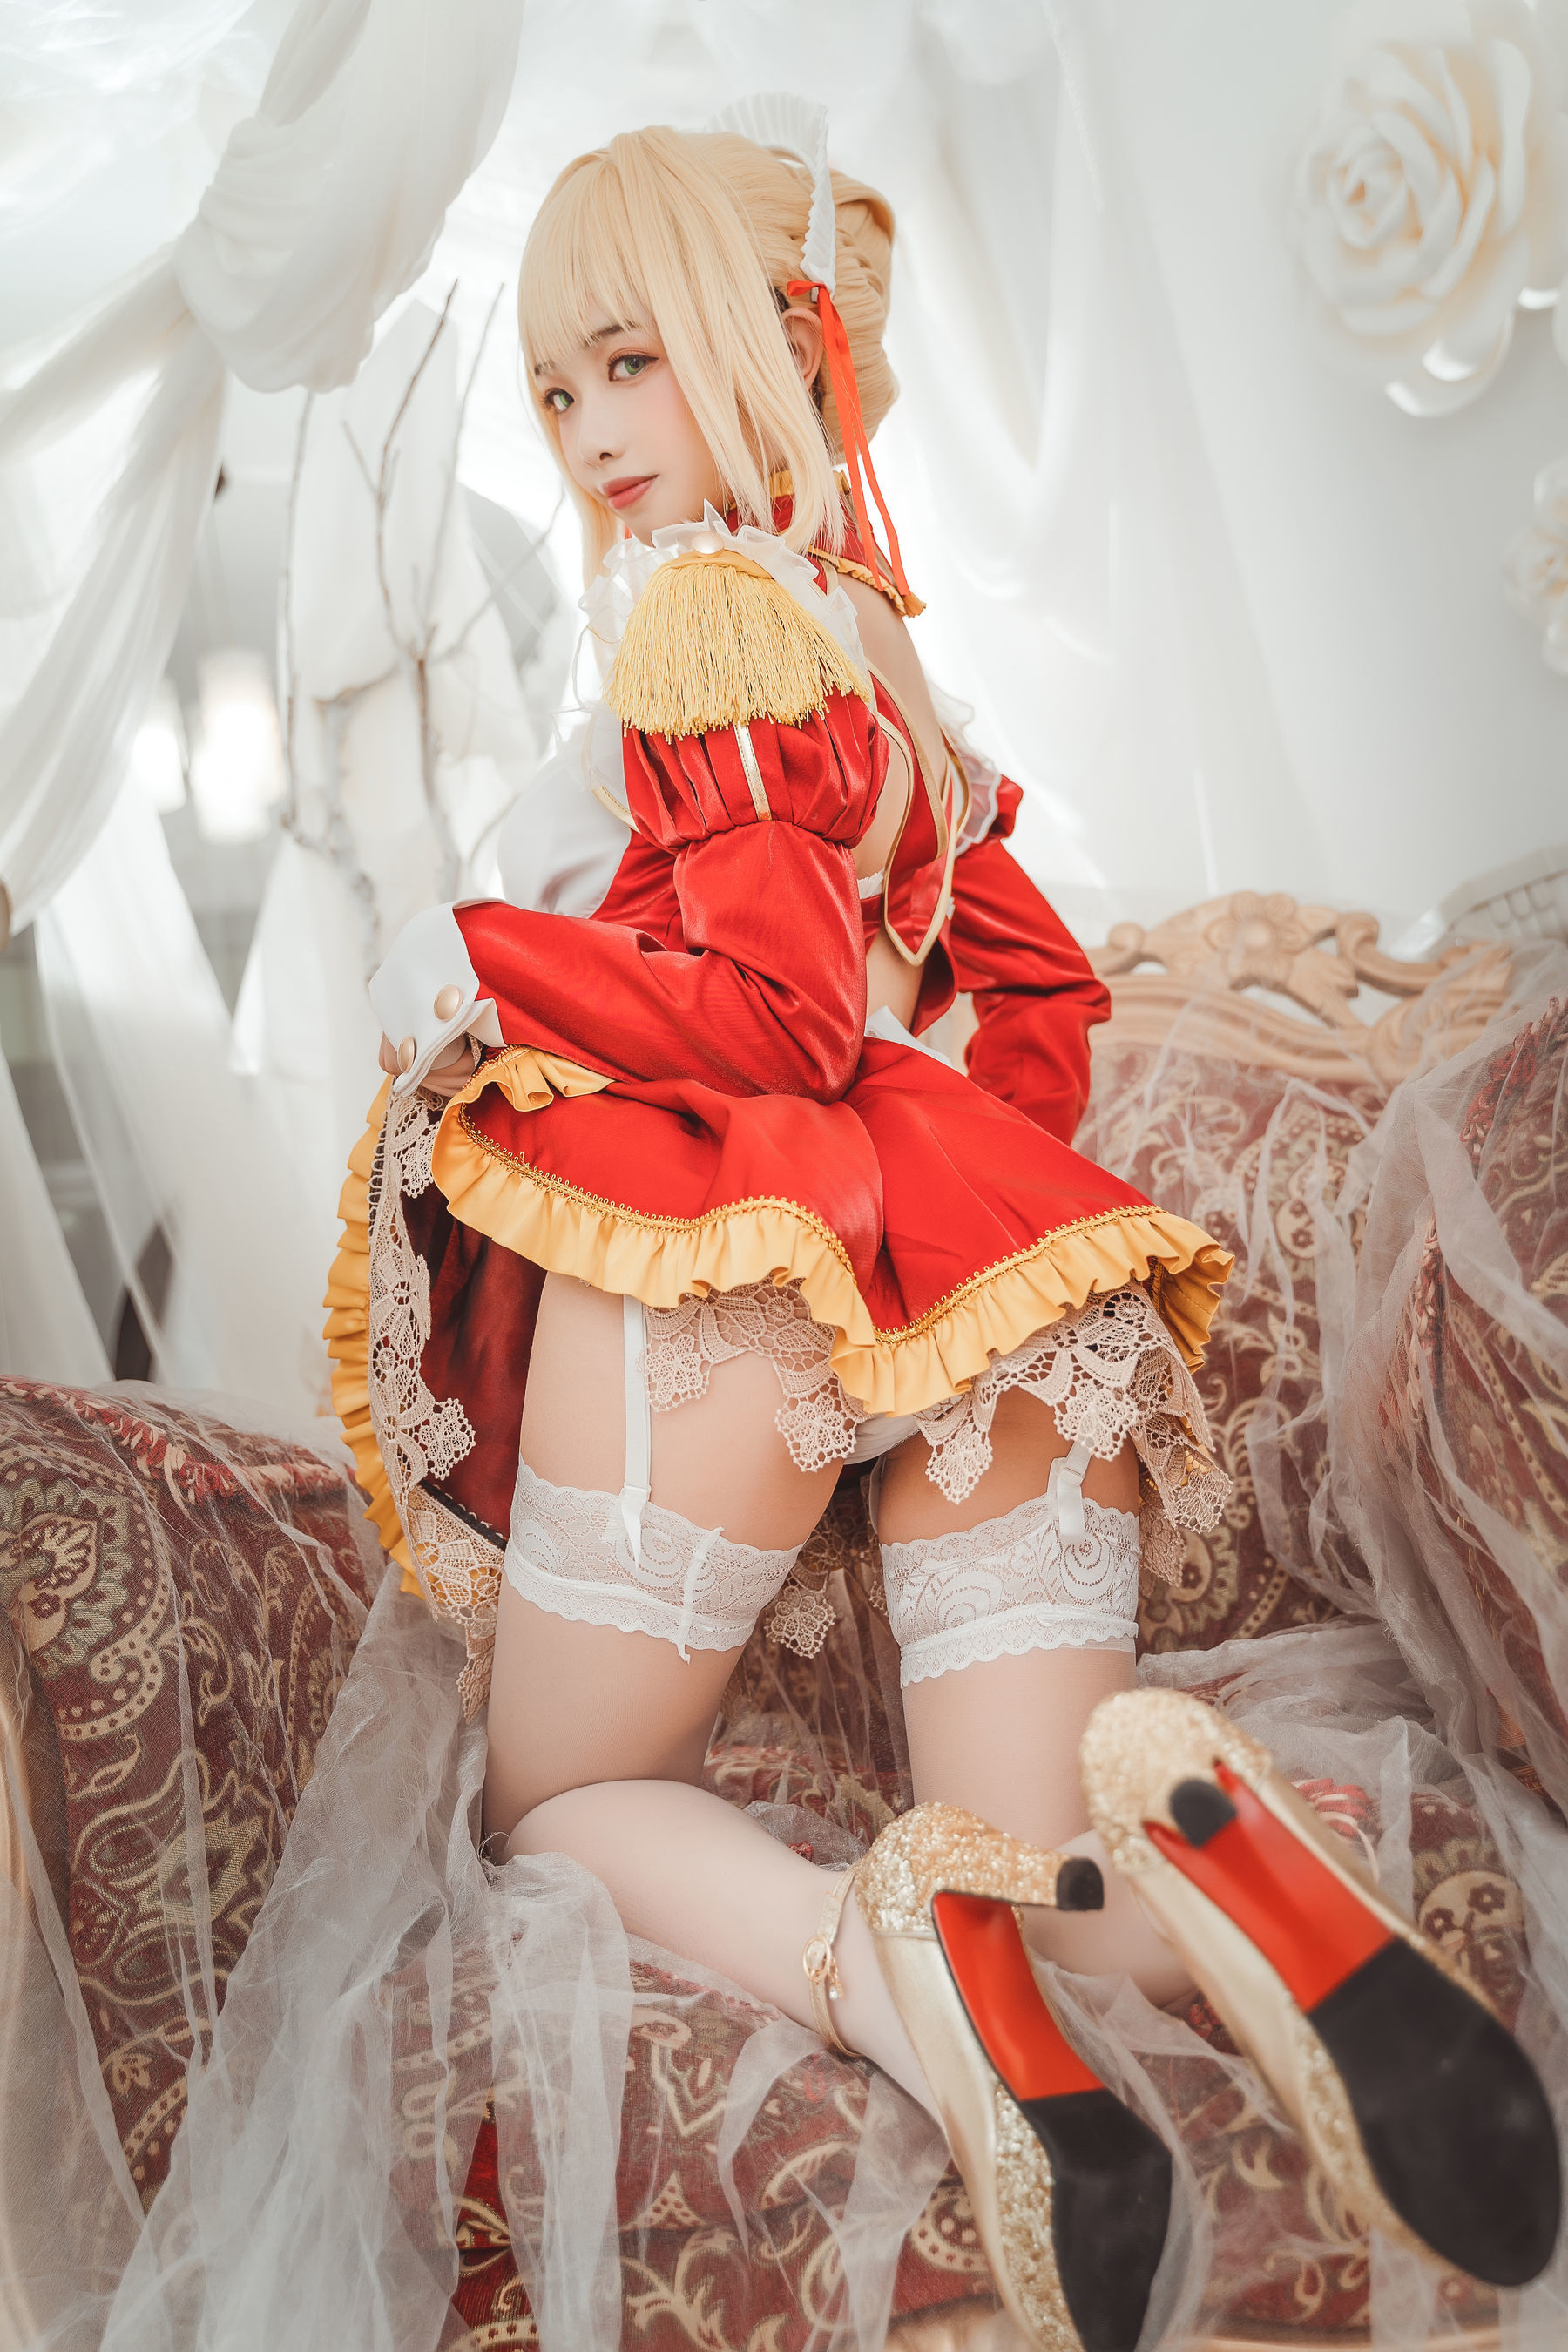 [Beauty Coser] Wenmei "The Maid of Nero" Page 13 No.e22bee